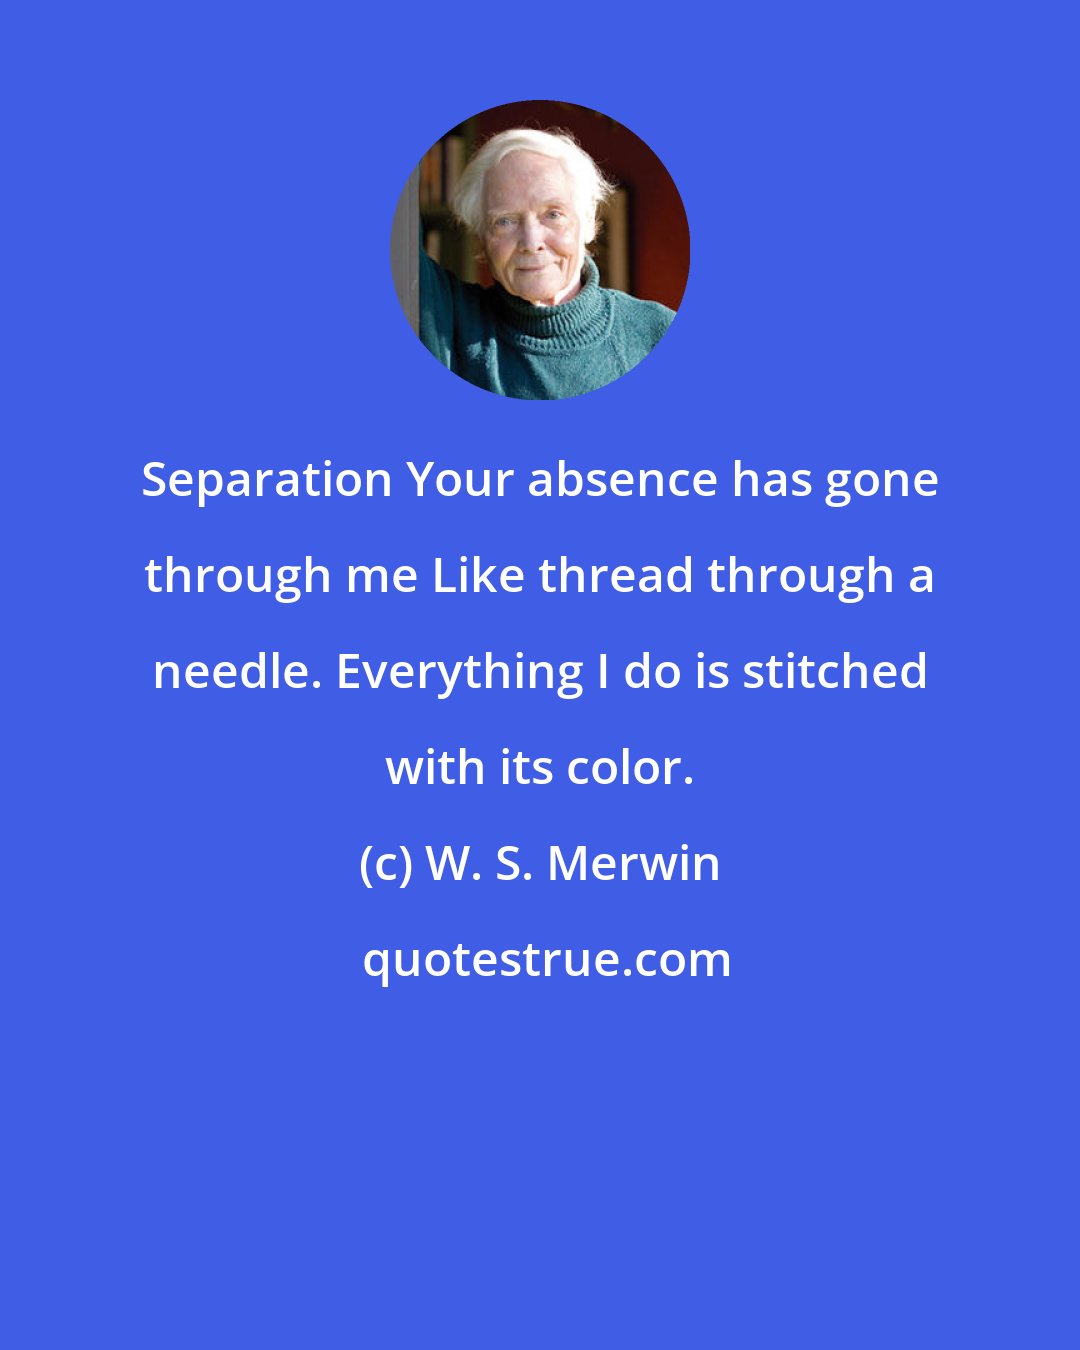 W. S. Merwin: Separation Your absence has gone through me Like thread through a needle. Everything I do is stitched with its color.